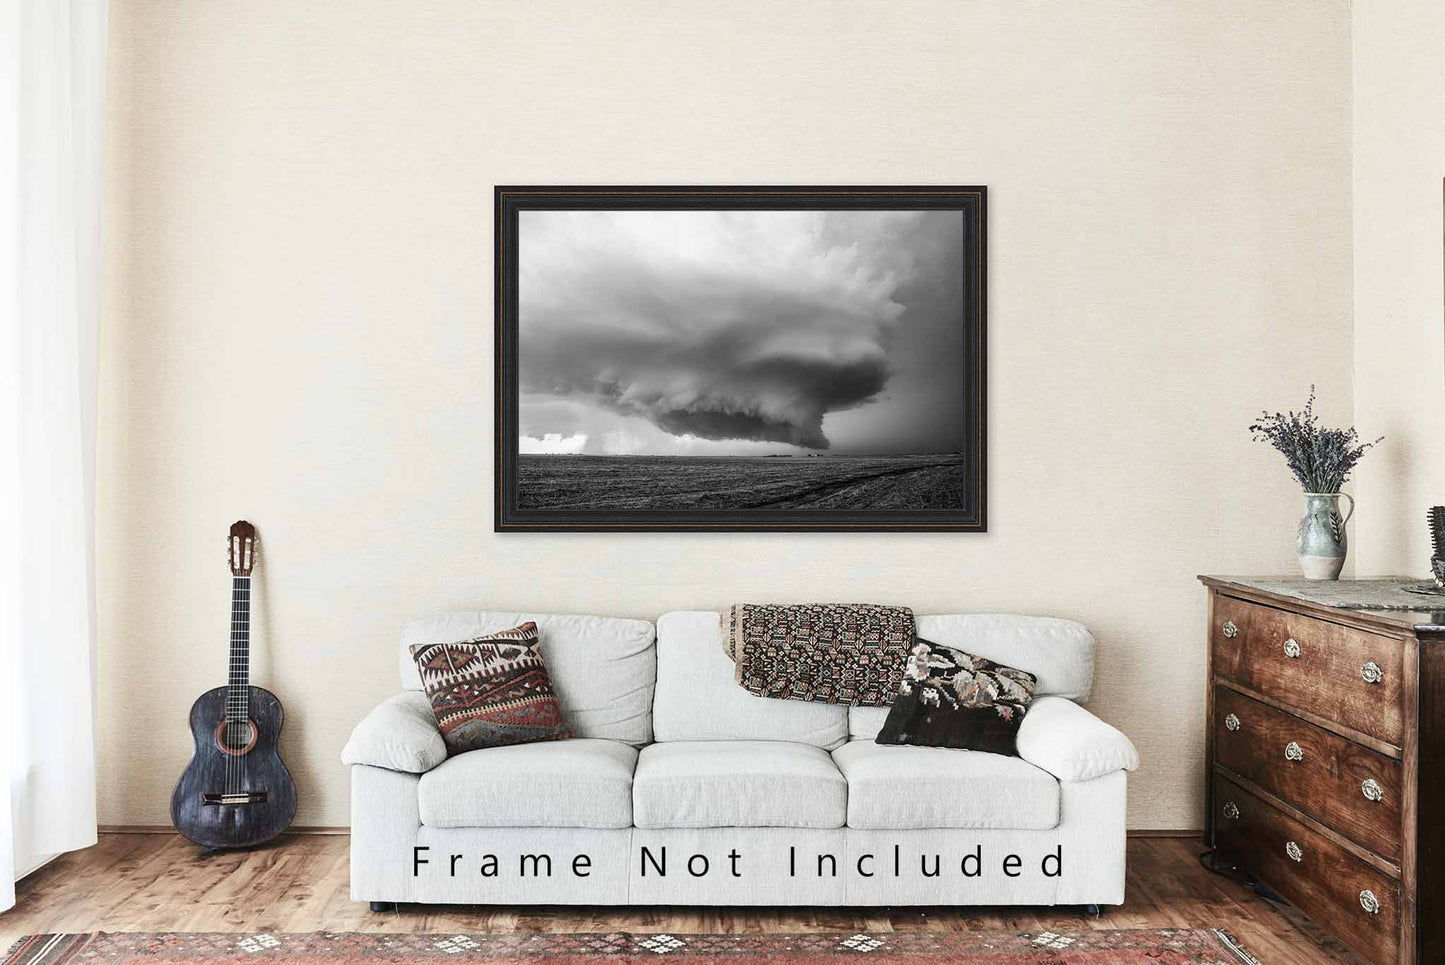 Storm Photography Print - Picture of Incredible Thunderstorm Over Field in Kansas in Black and White Weather Nature Wall Art Photo Decor